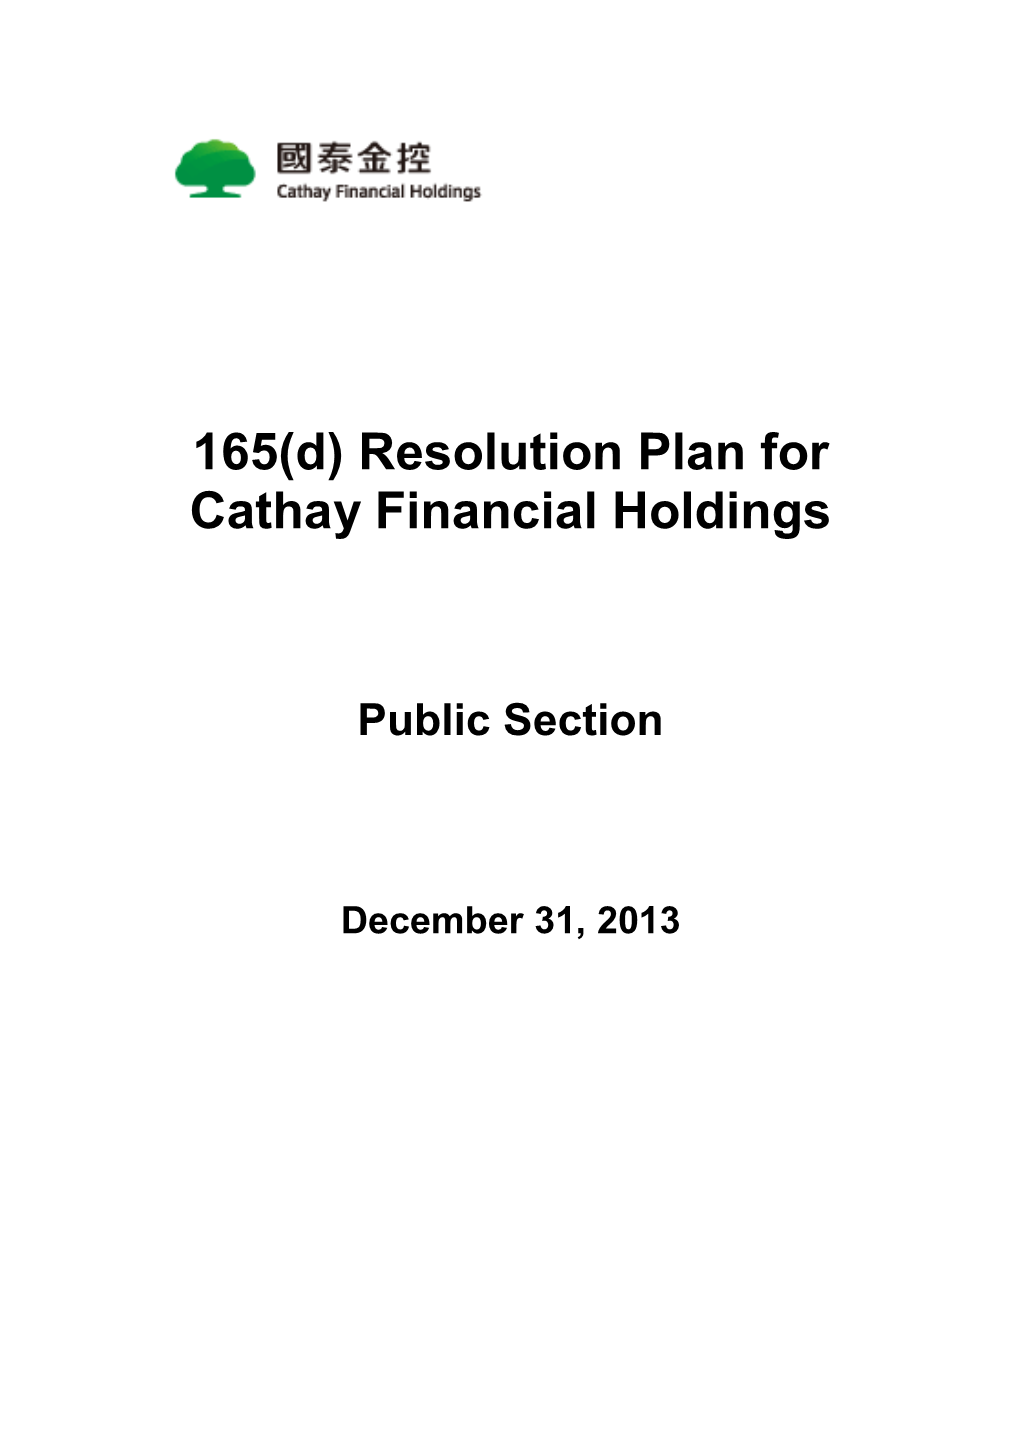 Resolution Plan for Cathay Financial Holdings